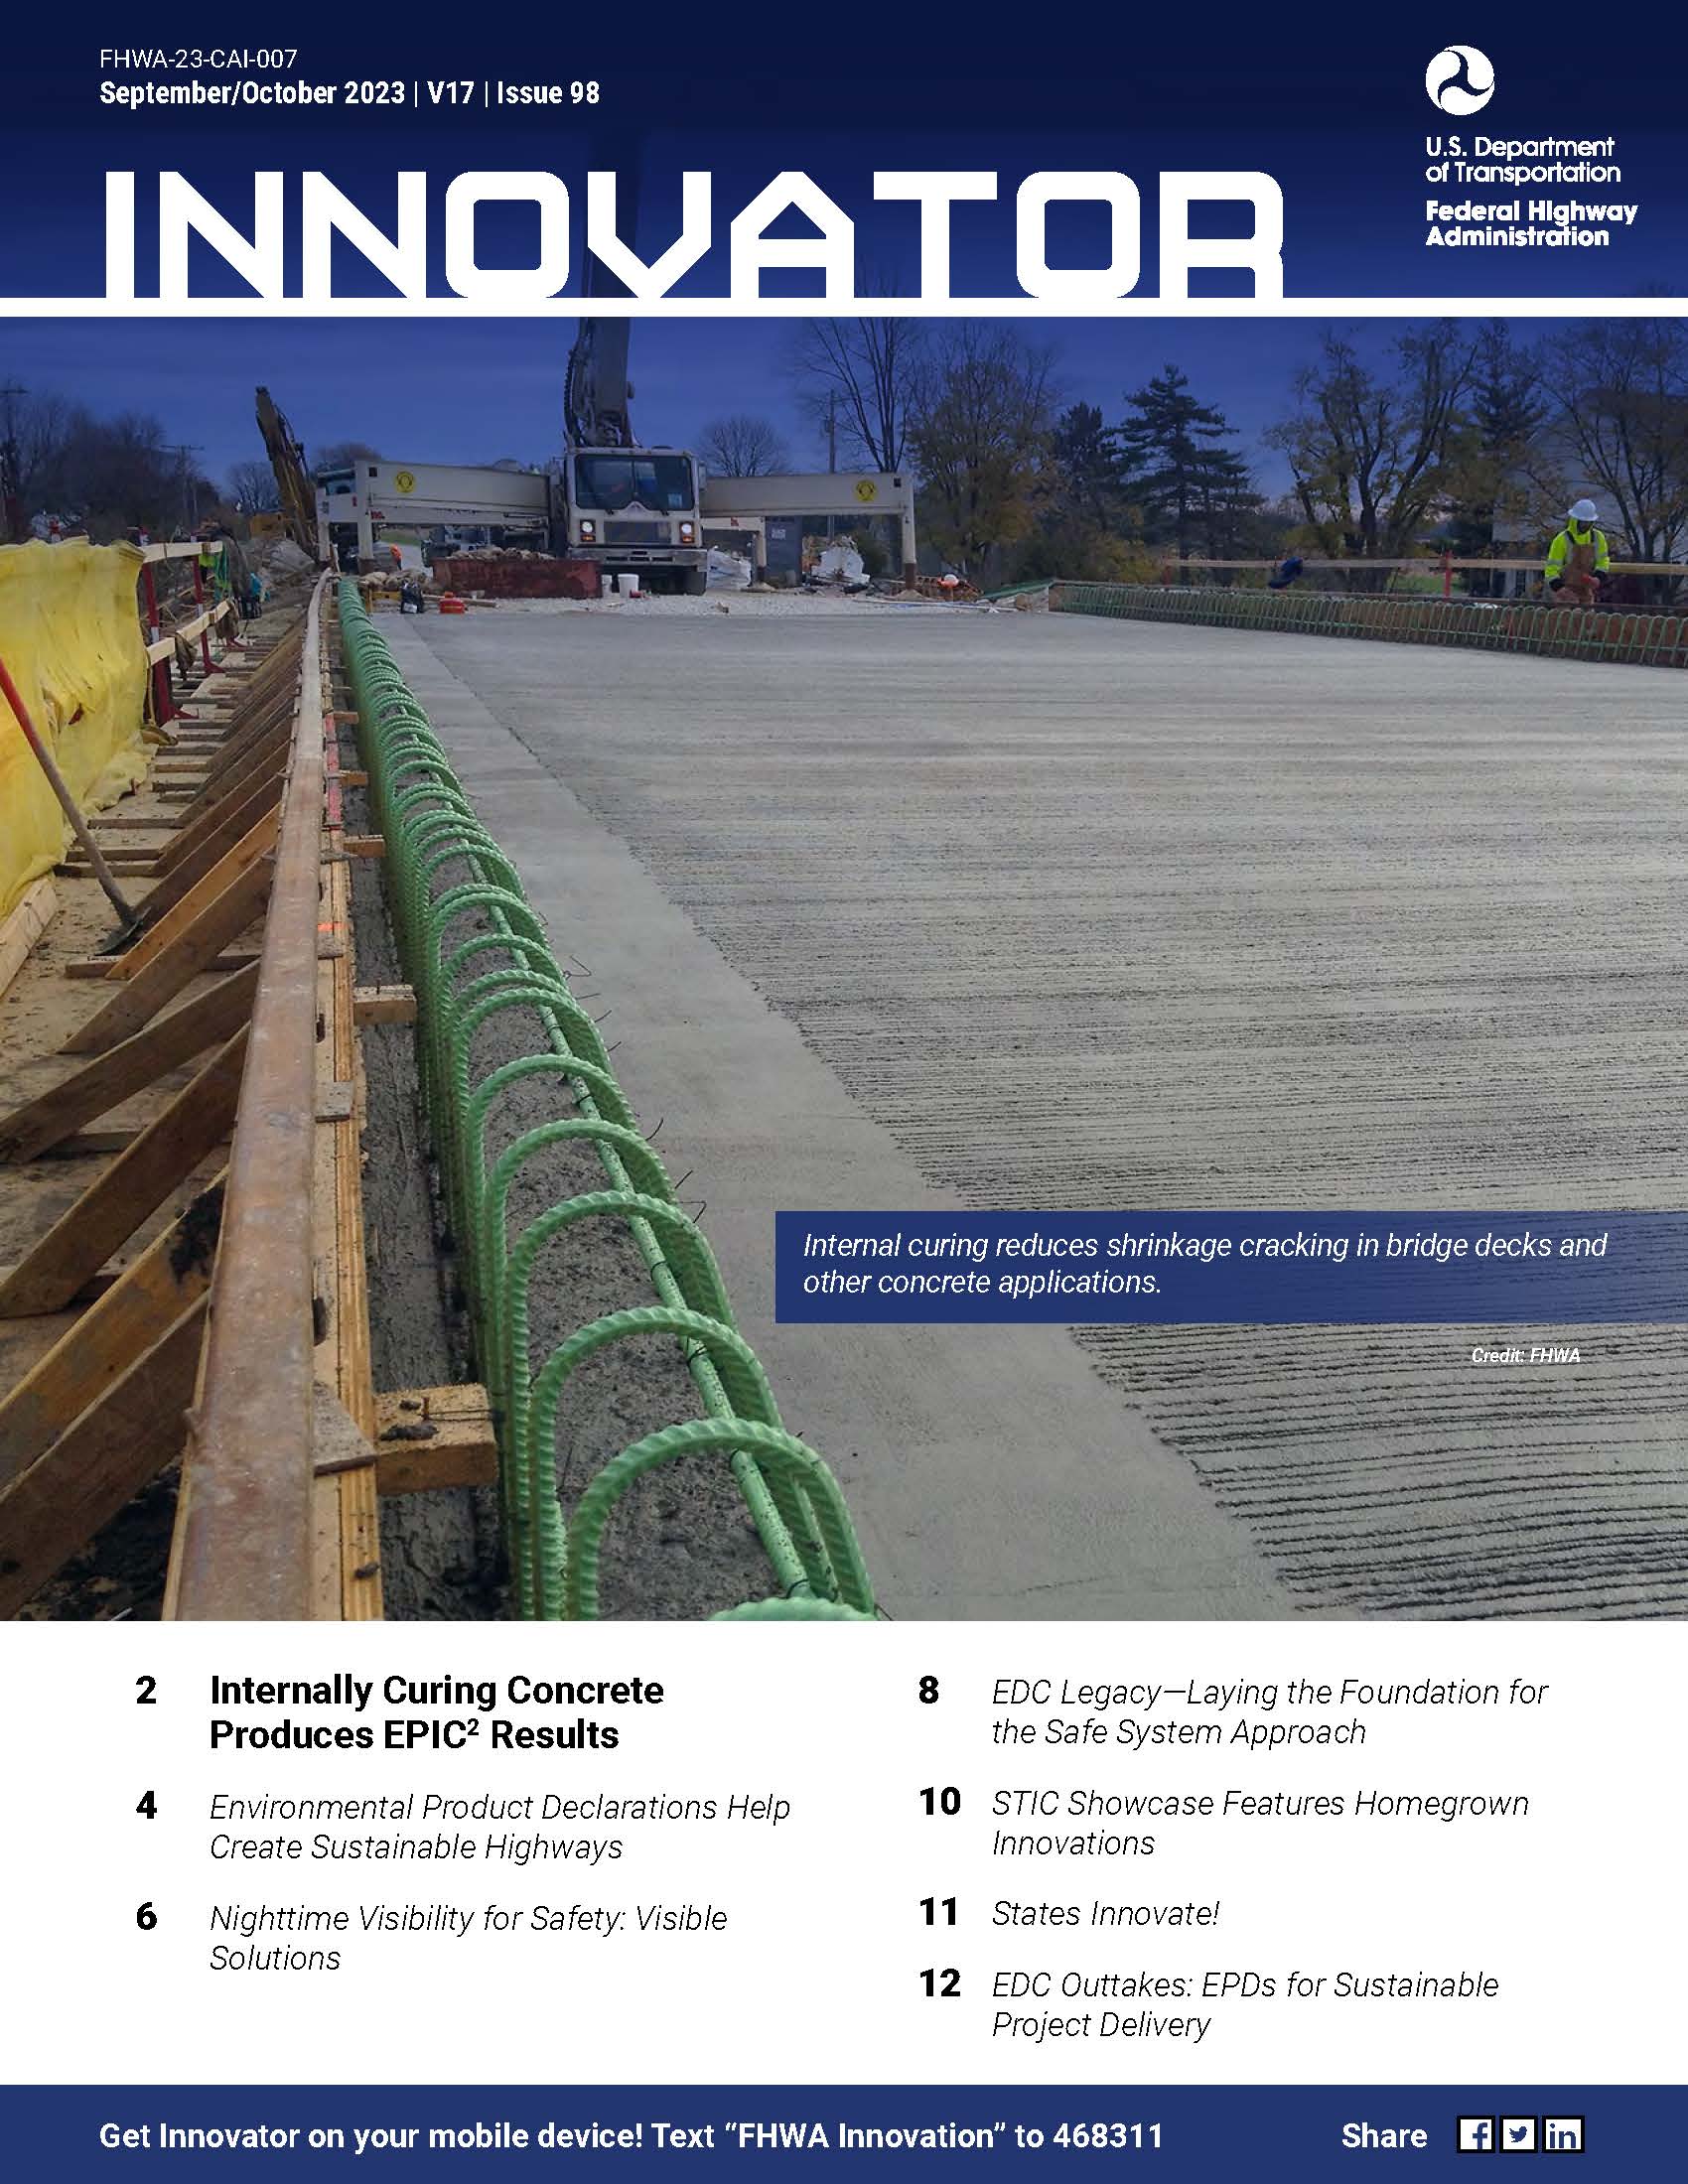 Screen capture of Innovator cover. Cover photo depicts a bridge deck under construction using internally cured concrete.